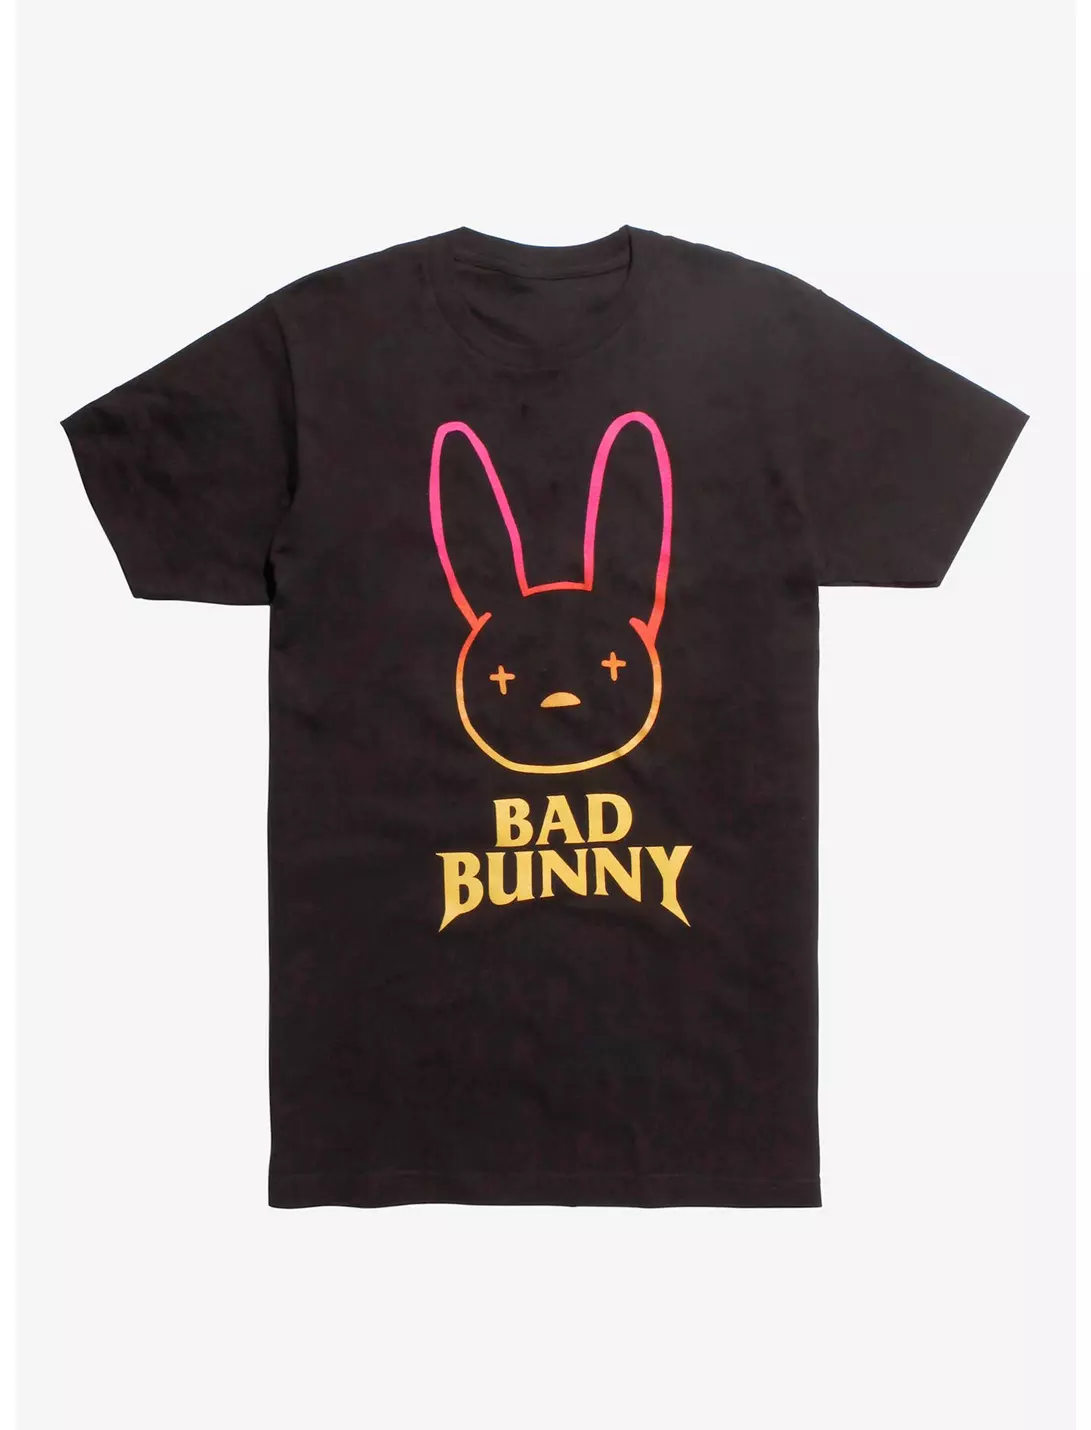 Bad Bunny with These Must Have T Shirt